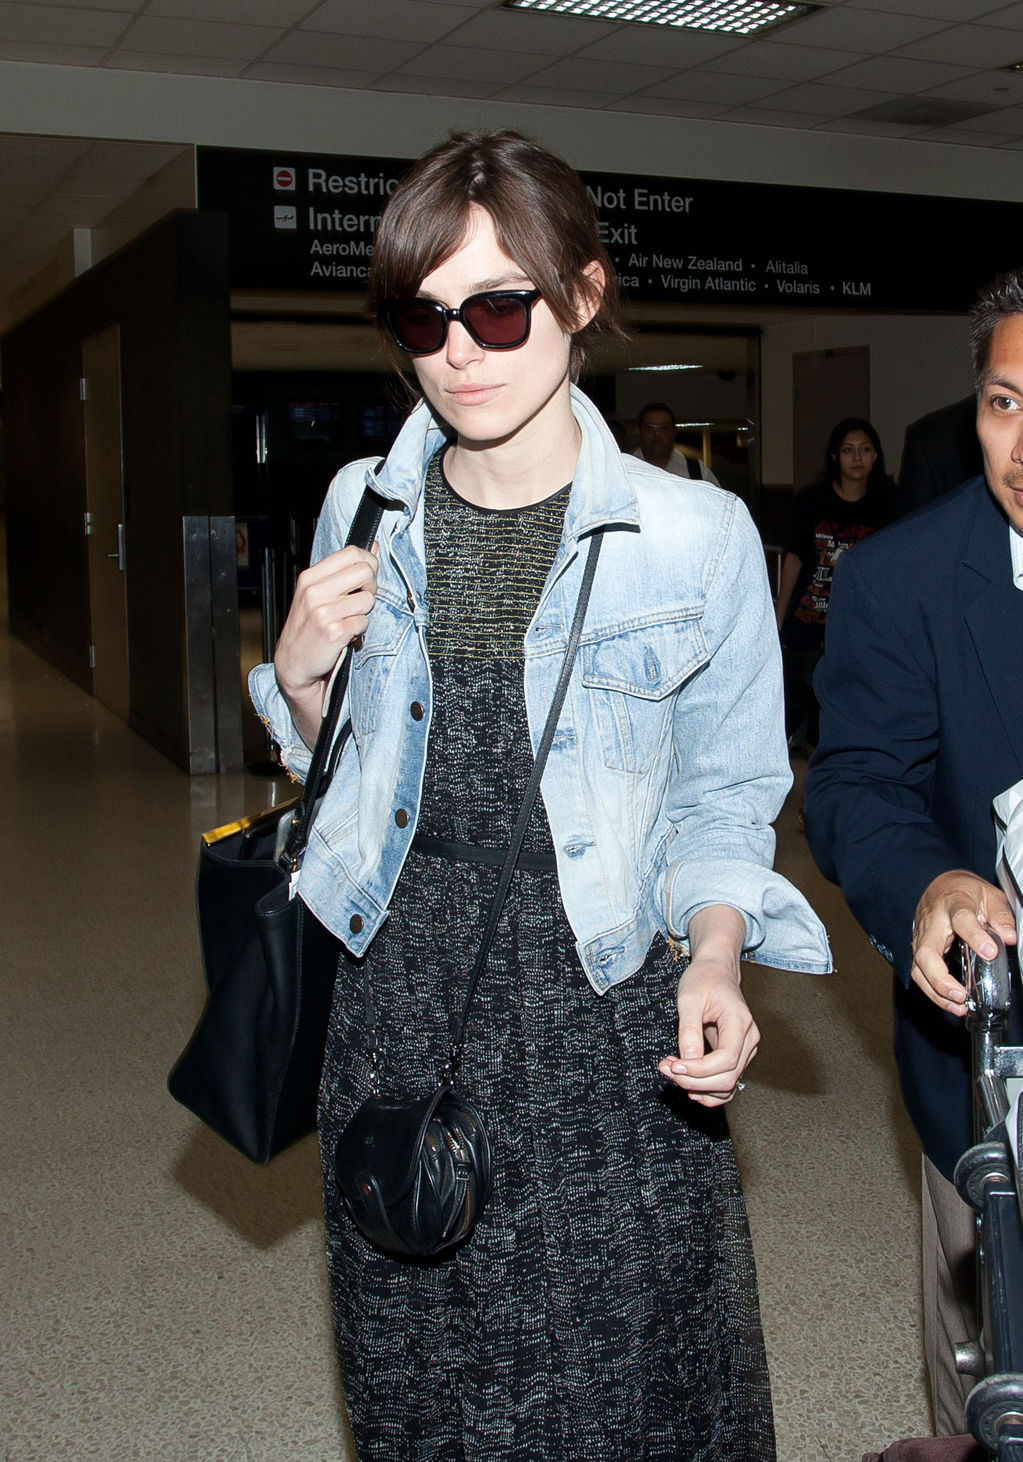 Keira Knightley At LAX Airport June 2012 | Just FAB Celebs